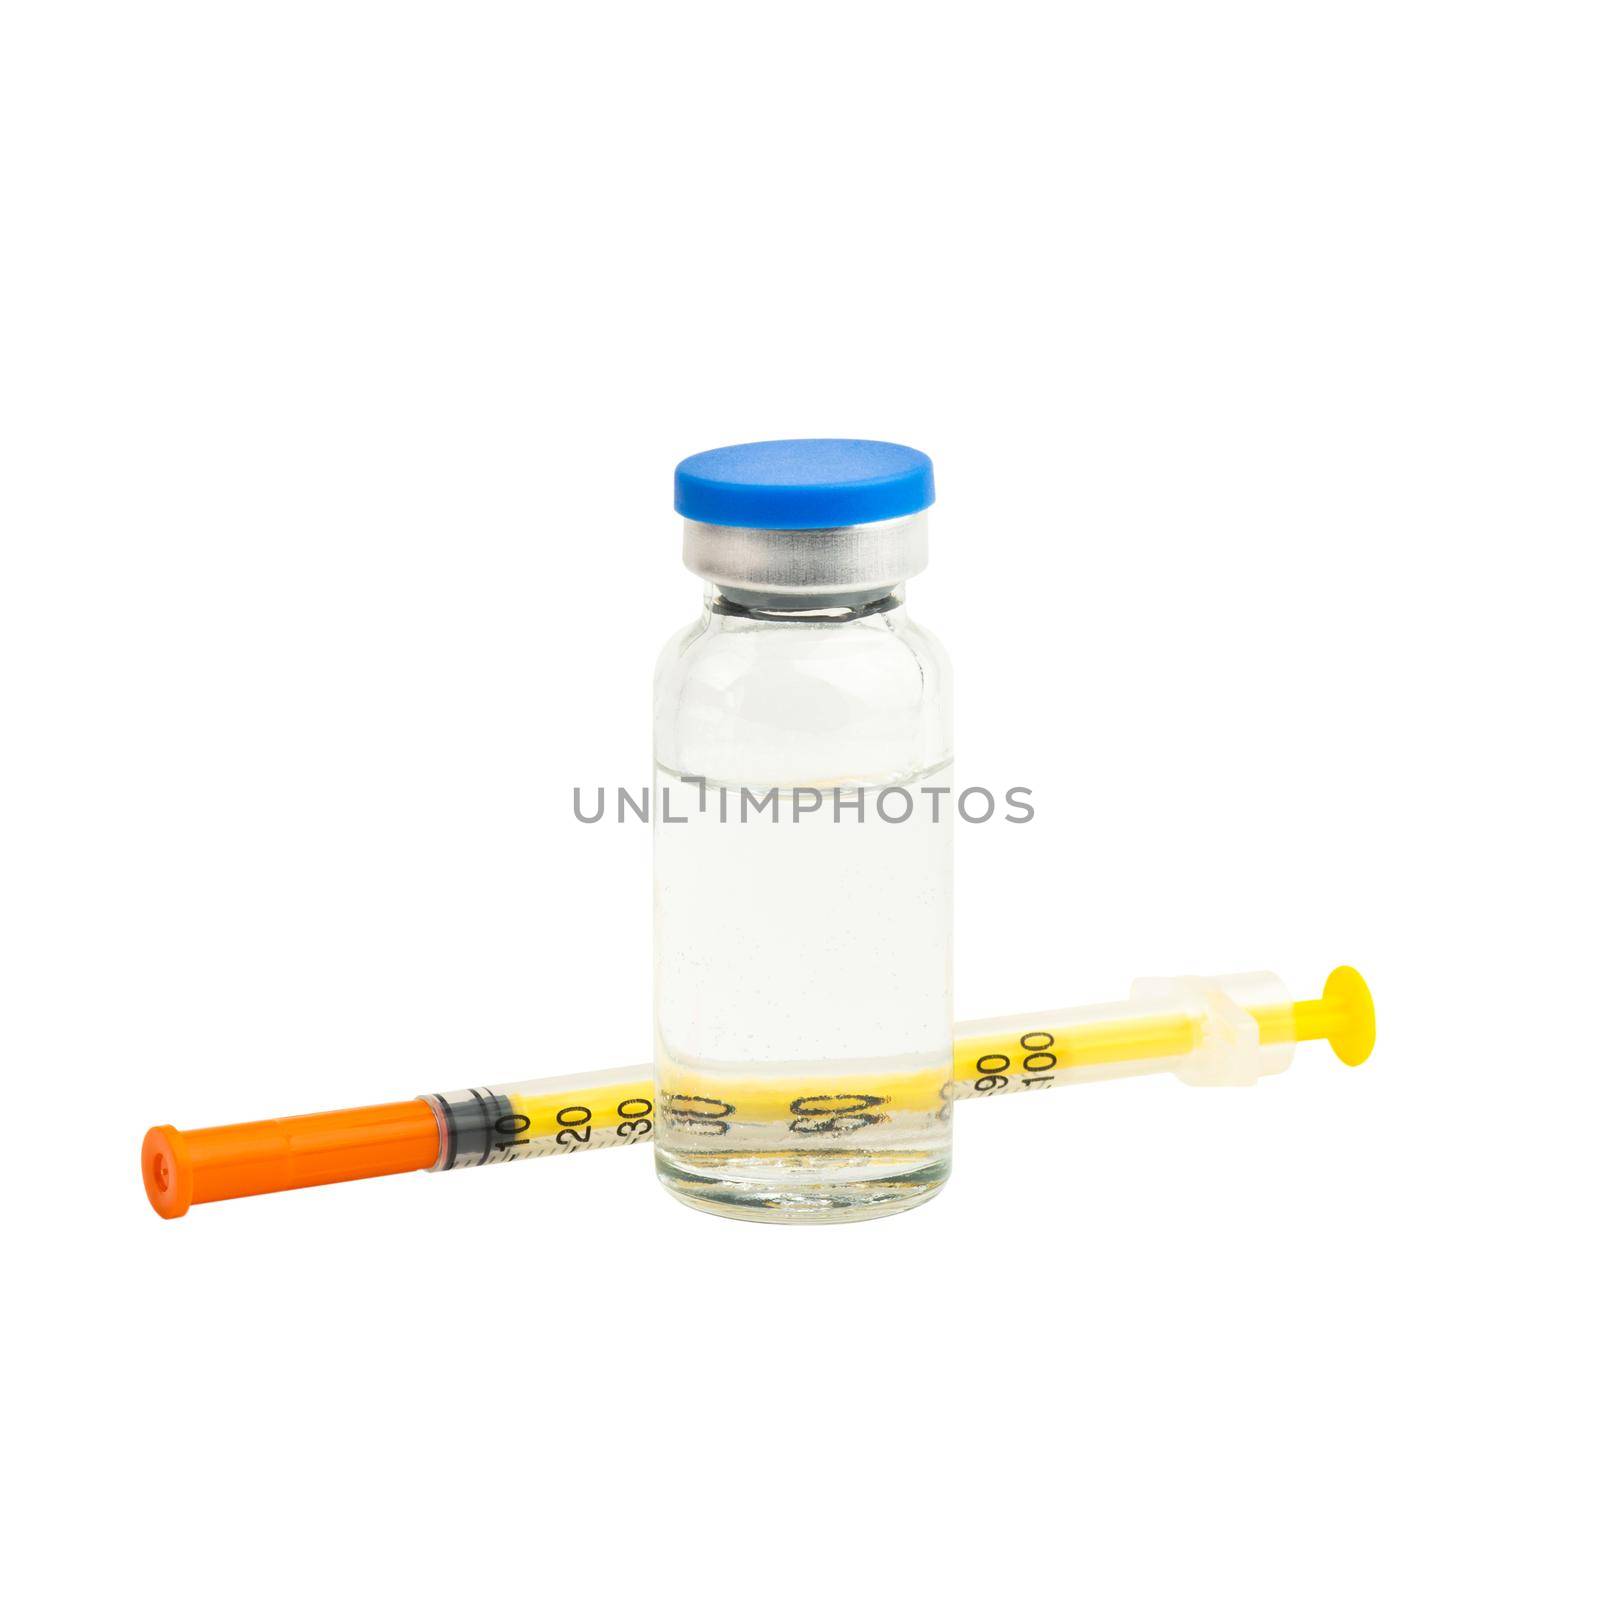 Medical syringe for injection for patients with diabetes mellitus. Insulin in a vial and a hypodermic syringe isolated on a white background without shadow.